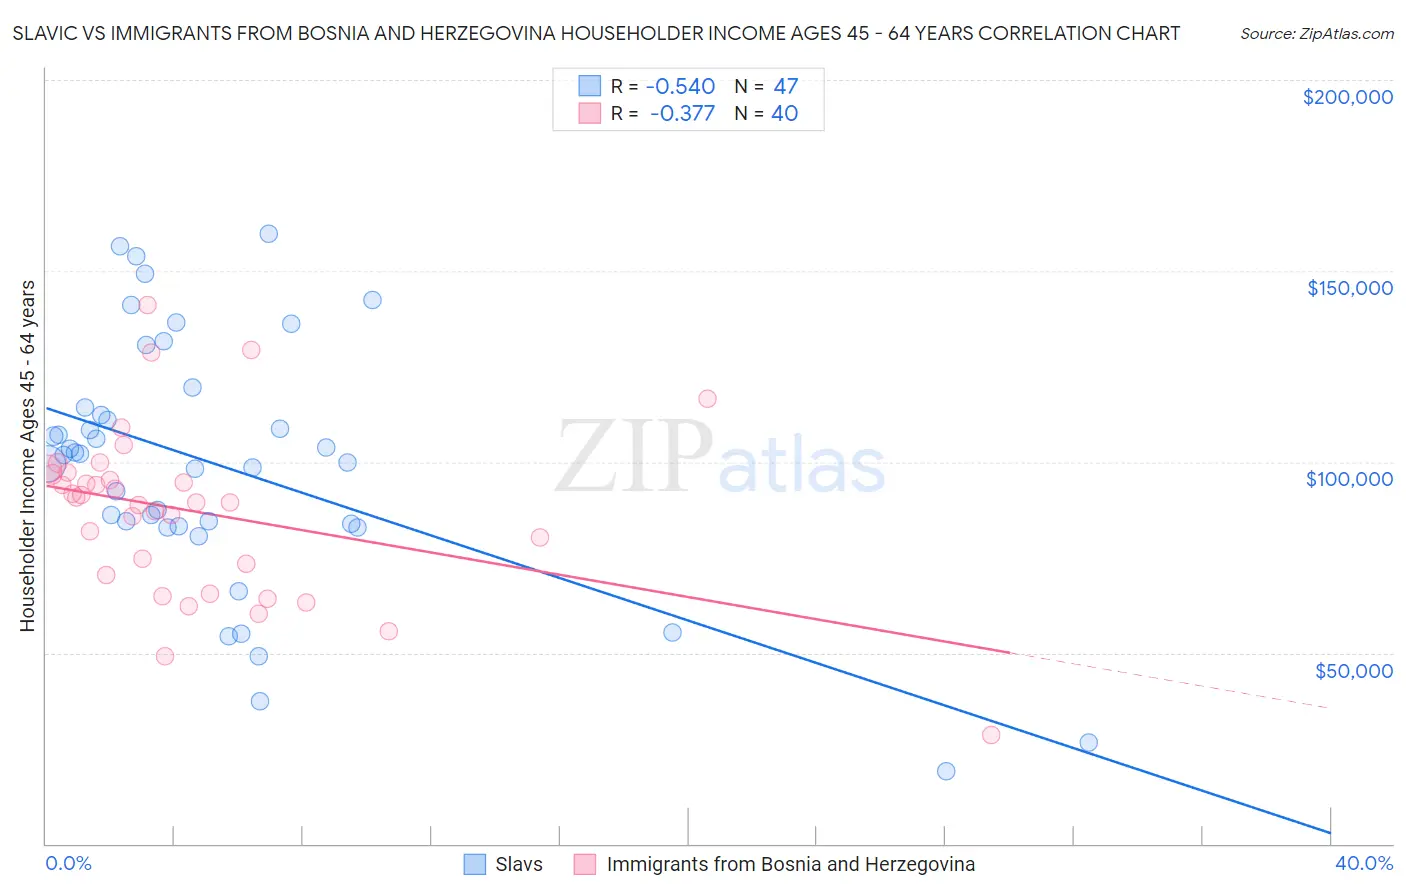 Slavic vs Immigrants from Bosnia and Herzegovina Householder Income Ages 45 - 64 years